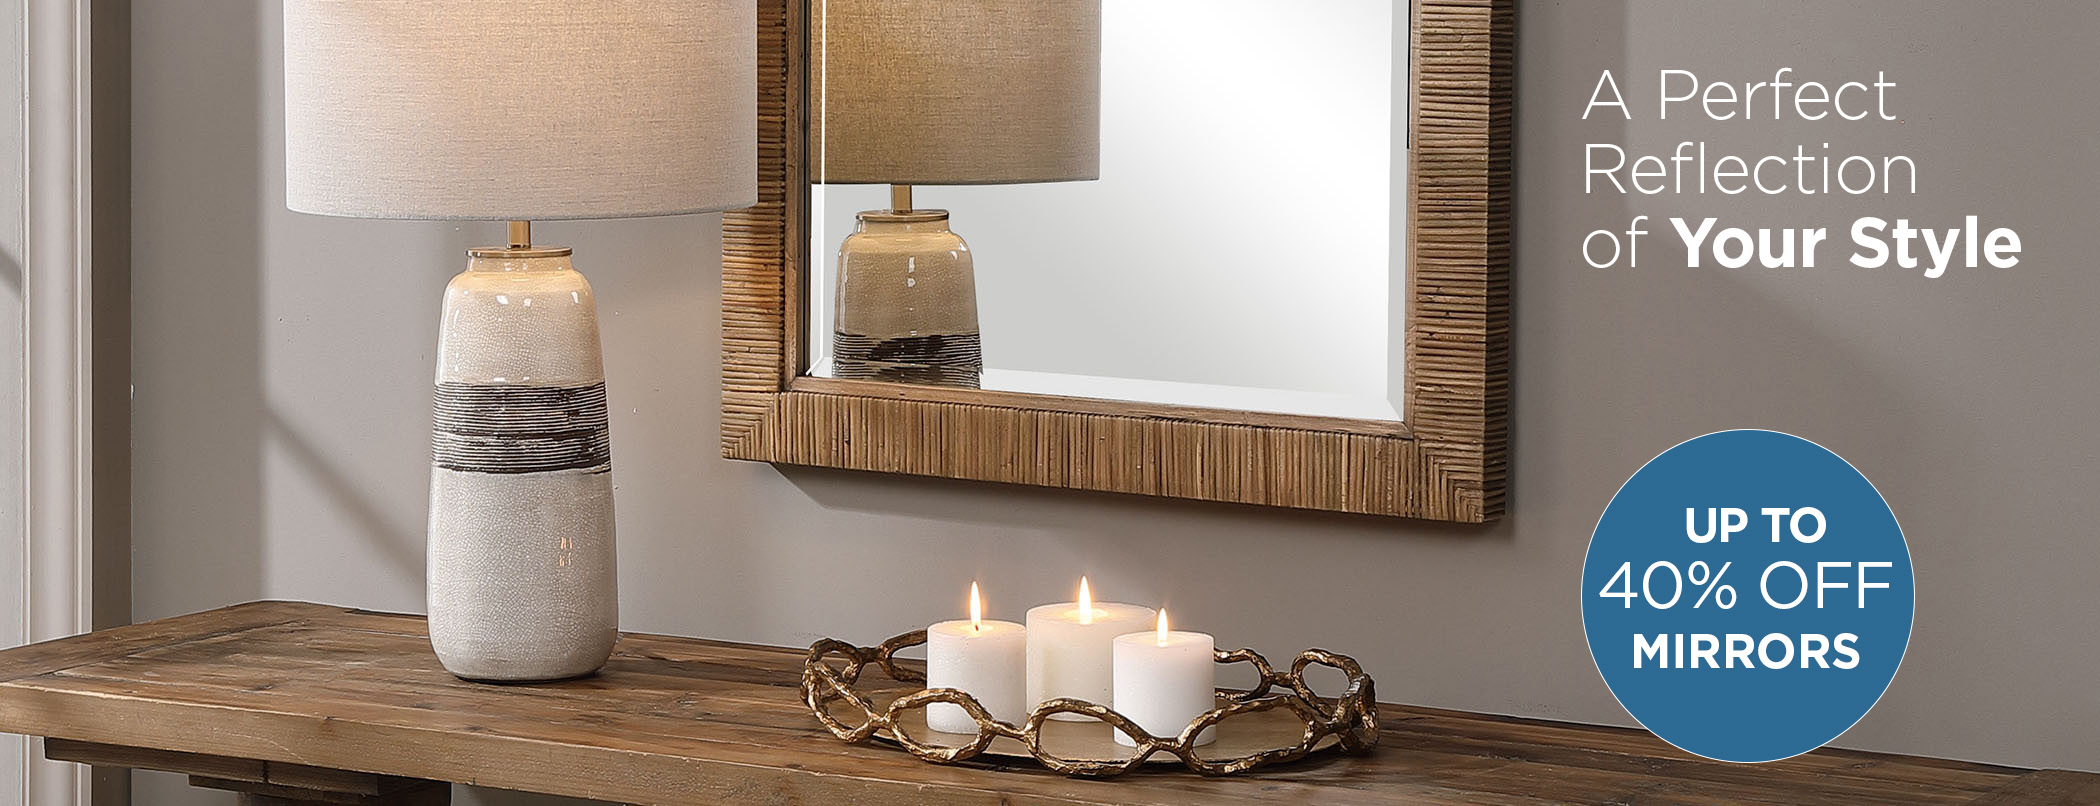 Save Up To 40% on Homethreads Mirrors